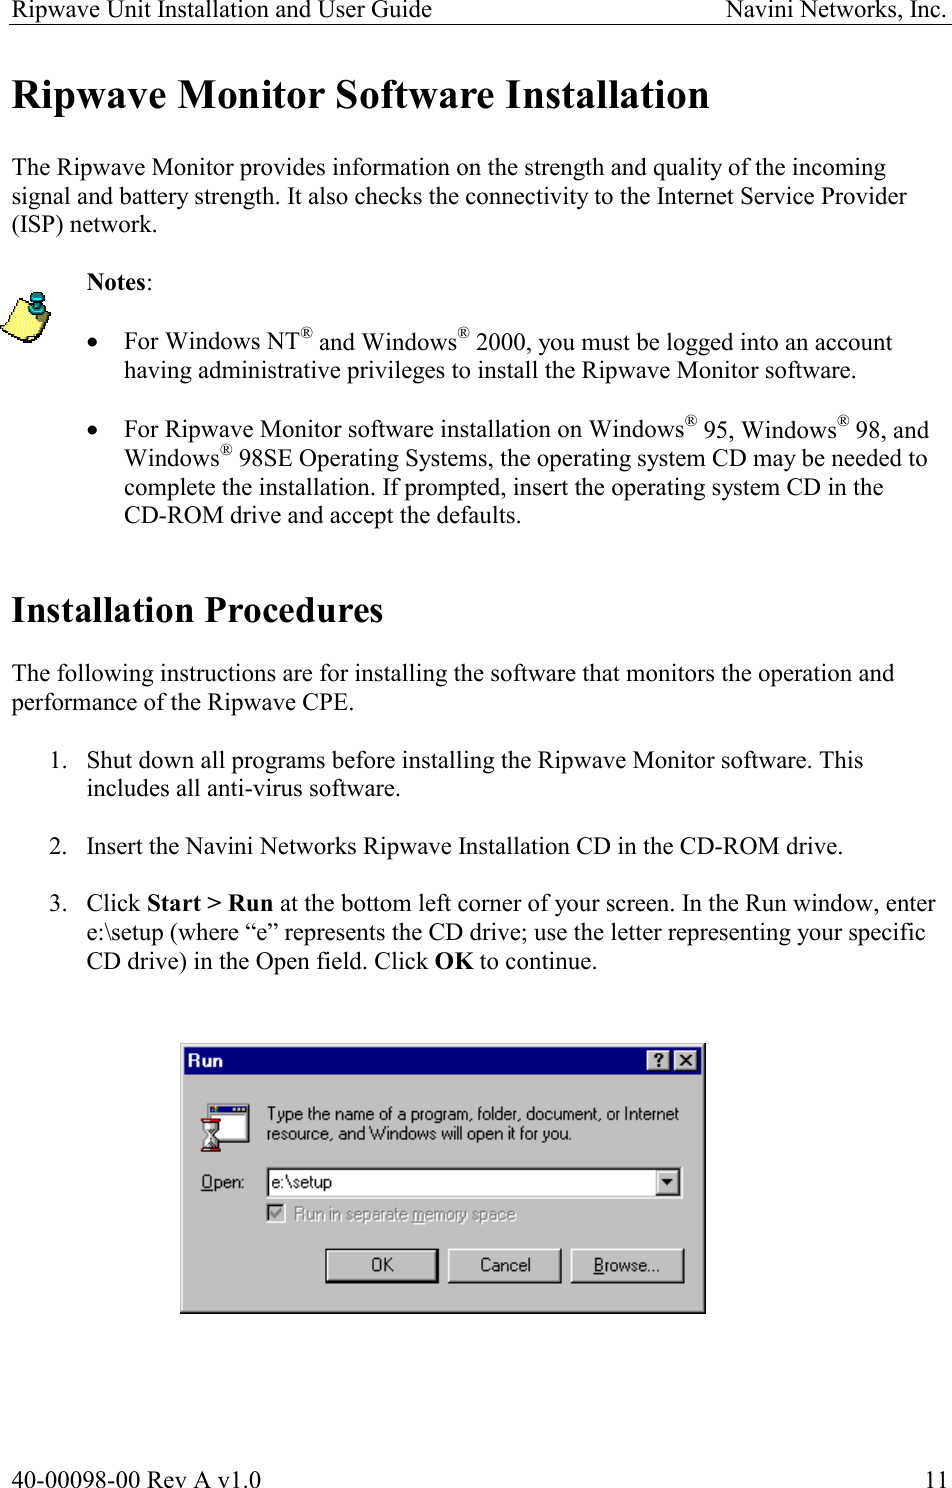 Ripwave Unit Installation and User Guide                                               Navini Networks, Inc. Ripwave Monitor Software Installation  The Ripwave Monitor provides information on the strength and quality of the incoming signal and battery strength. It also checks the connectivity to the Internet Service Provider (ISP) network.   Notes:   ·  For Windows NT® and Windows® 2000, you must be logged into an account having administrative privileges to install the Ripwave Monitor software.  ·  For Ripwave Monitor software installation on Windows® 95, Windows® 98, and Windows® 98SE Operating Systems, the operating system CD may be needed to complete the installation. If prompted, insert the operating system CD in the  CD-ROM drive and accept the defaults.   Installation Procedures  The following instructions are for installing the software that monitors the operation and performance of the Ripwave CPE.   1.  Shut down all programs before installing the Ripwave Monitor software. This includes all anti-virus software.  2.  Insert the Navini Networks Ripwave Installation CD in the CD-ROM drive.  3. Click Start &gt; Run at the bottom left corner of your screen. In the Run window, enter e:\setup (where “e” represents the CD drive; use the letter representing your specific CD drive) in the Open field. Click OK to continue.                  40-00098-00 Rev A v1.0  11 